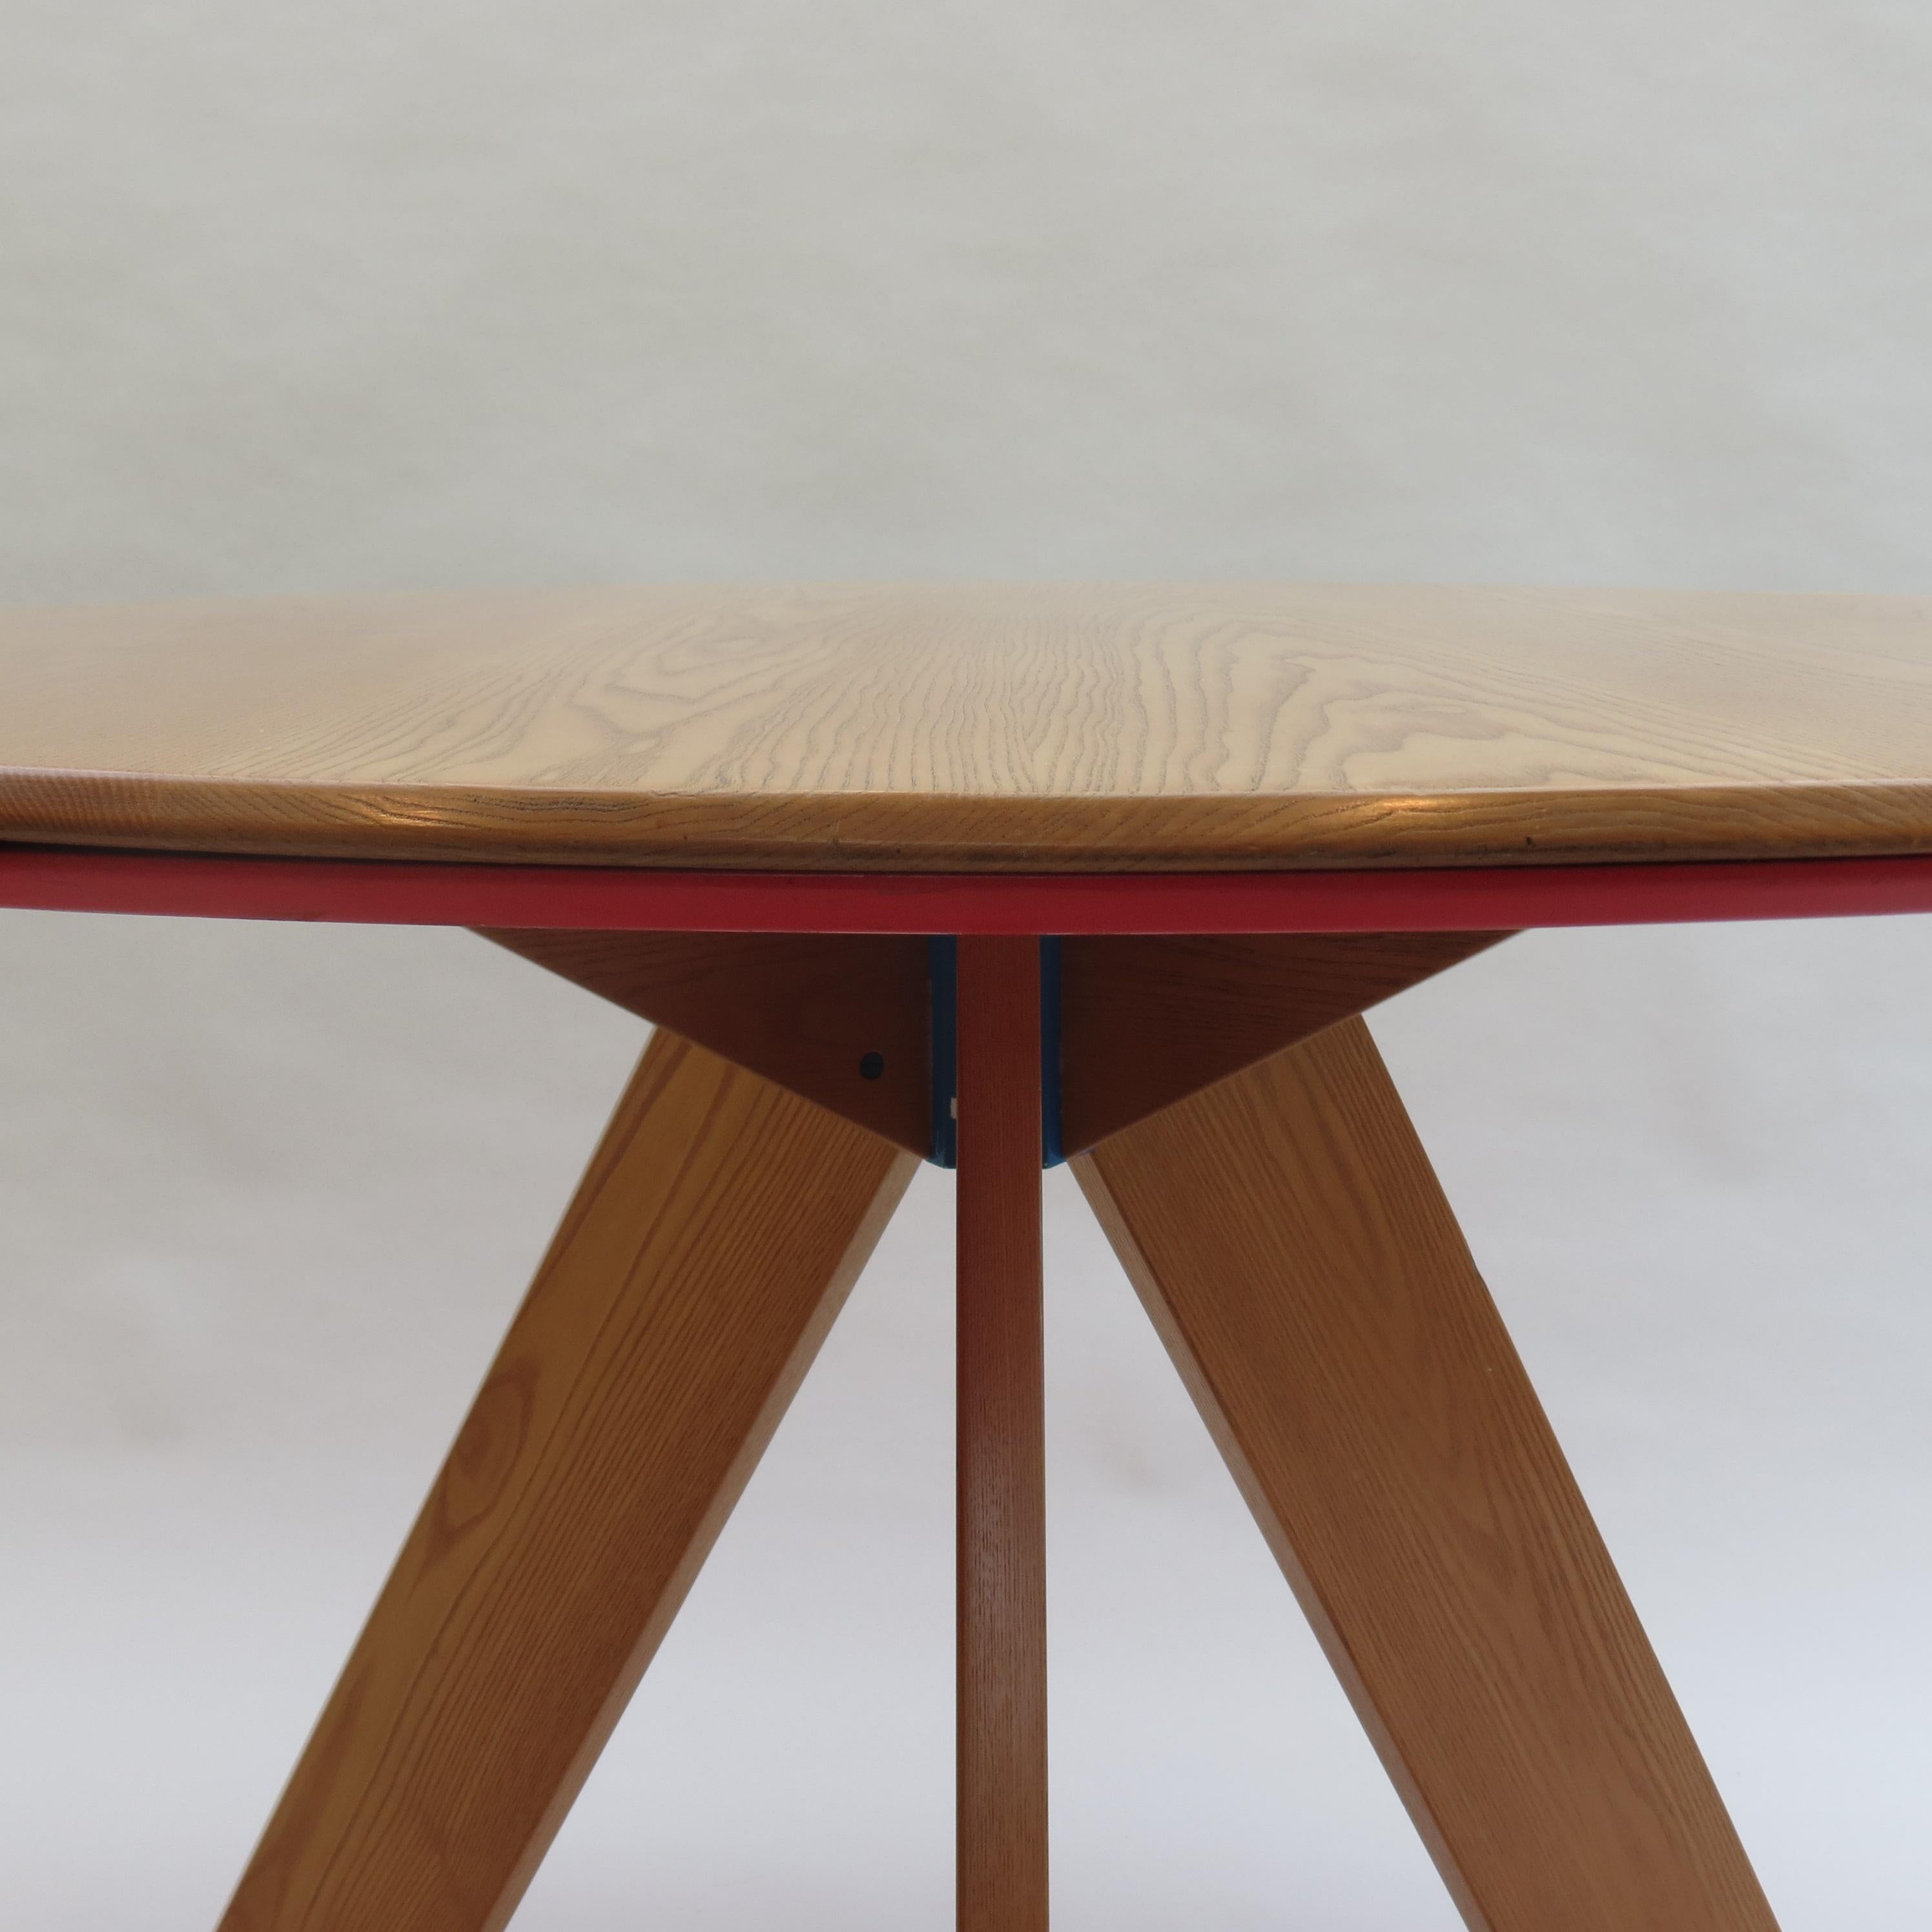 Midcentury Bespoke Circular Ash Dining Table by David Field 1980s with Red Blue 4